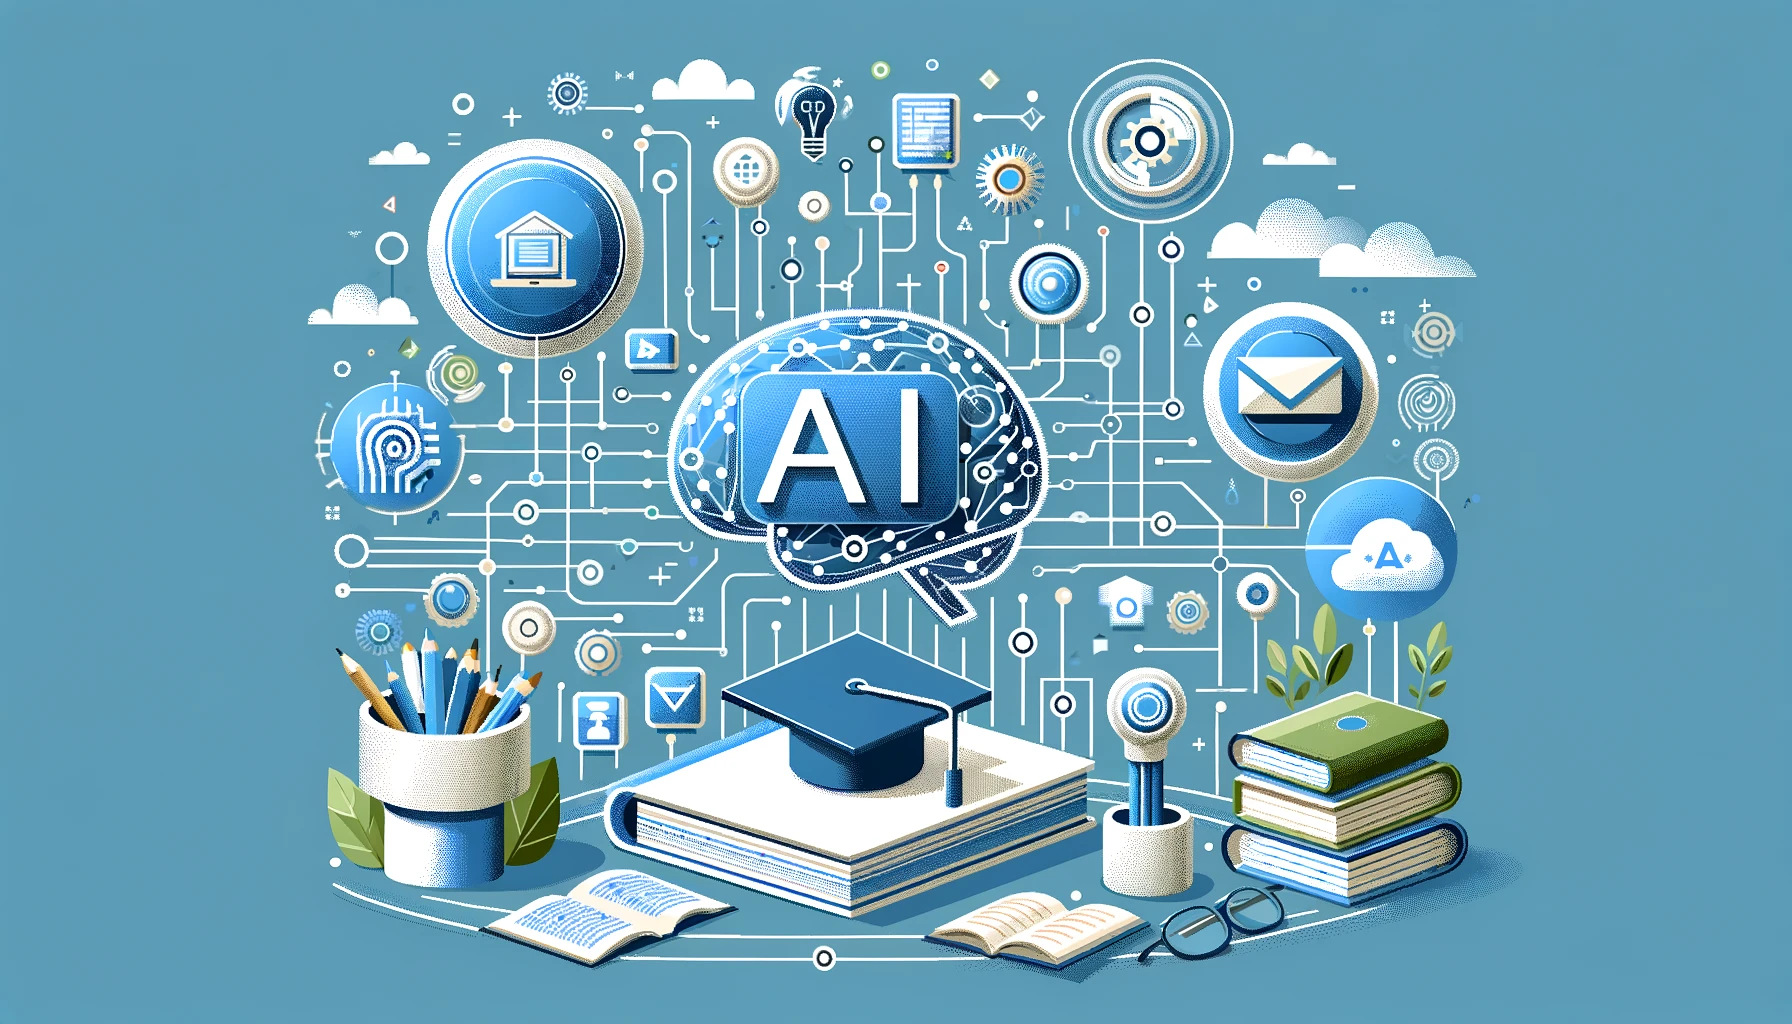 AI has the potential to significantly improve education through various key initiatives and solutions.